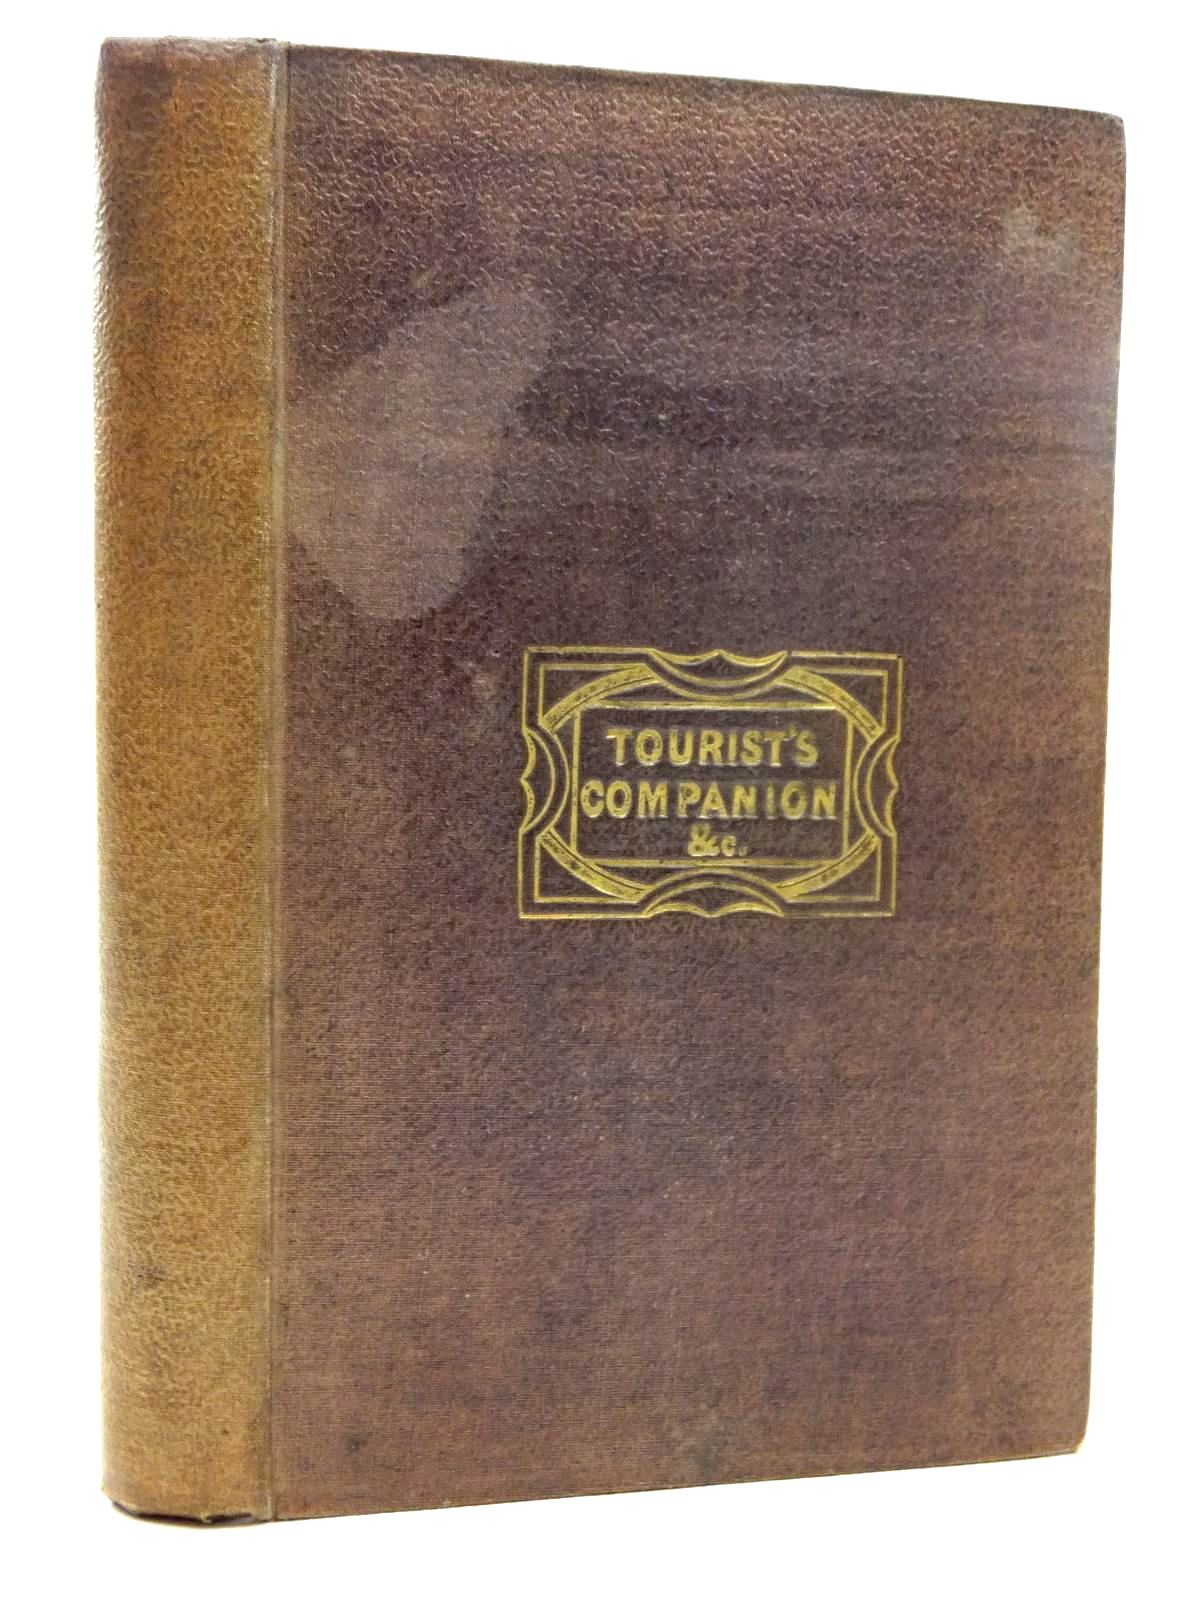 Photo of THE TOURIST'S COMPANION FROM LEEDS THRO' SELBY TO HULL BY RAILROAD & STEAM PACKET written by Parsons, Edward published by Whittaker & Co. (STOCK CODE: 2123647)  for sale by Stella & Rose's Books